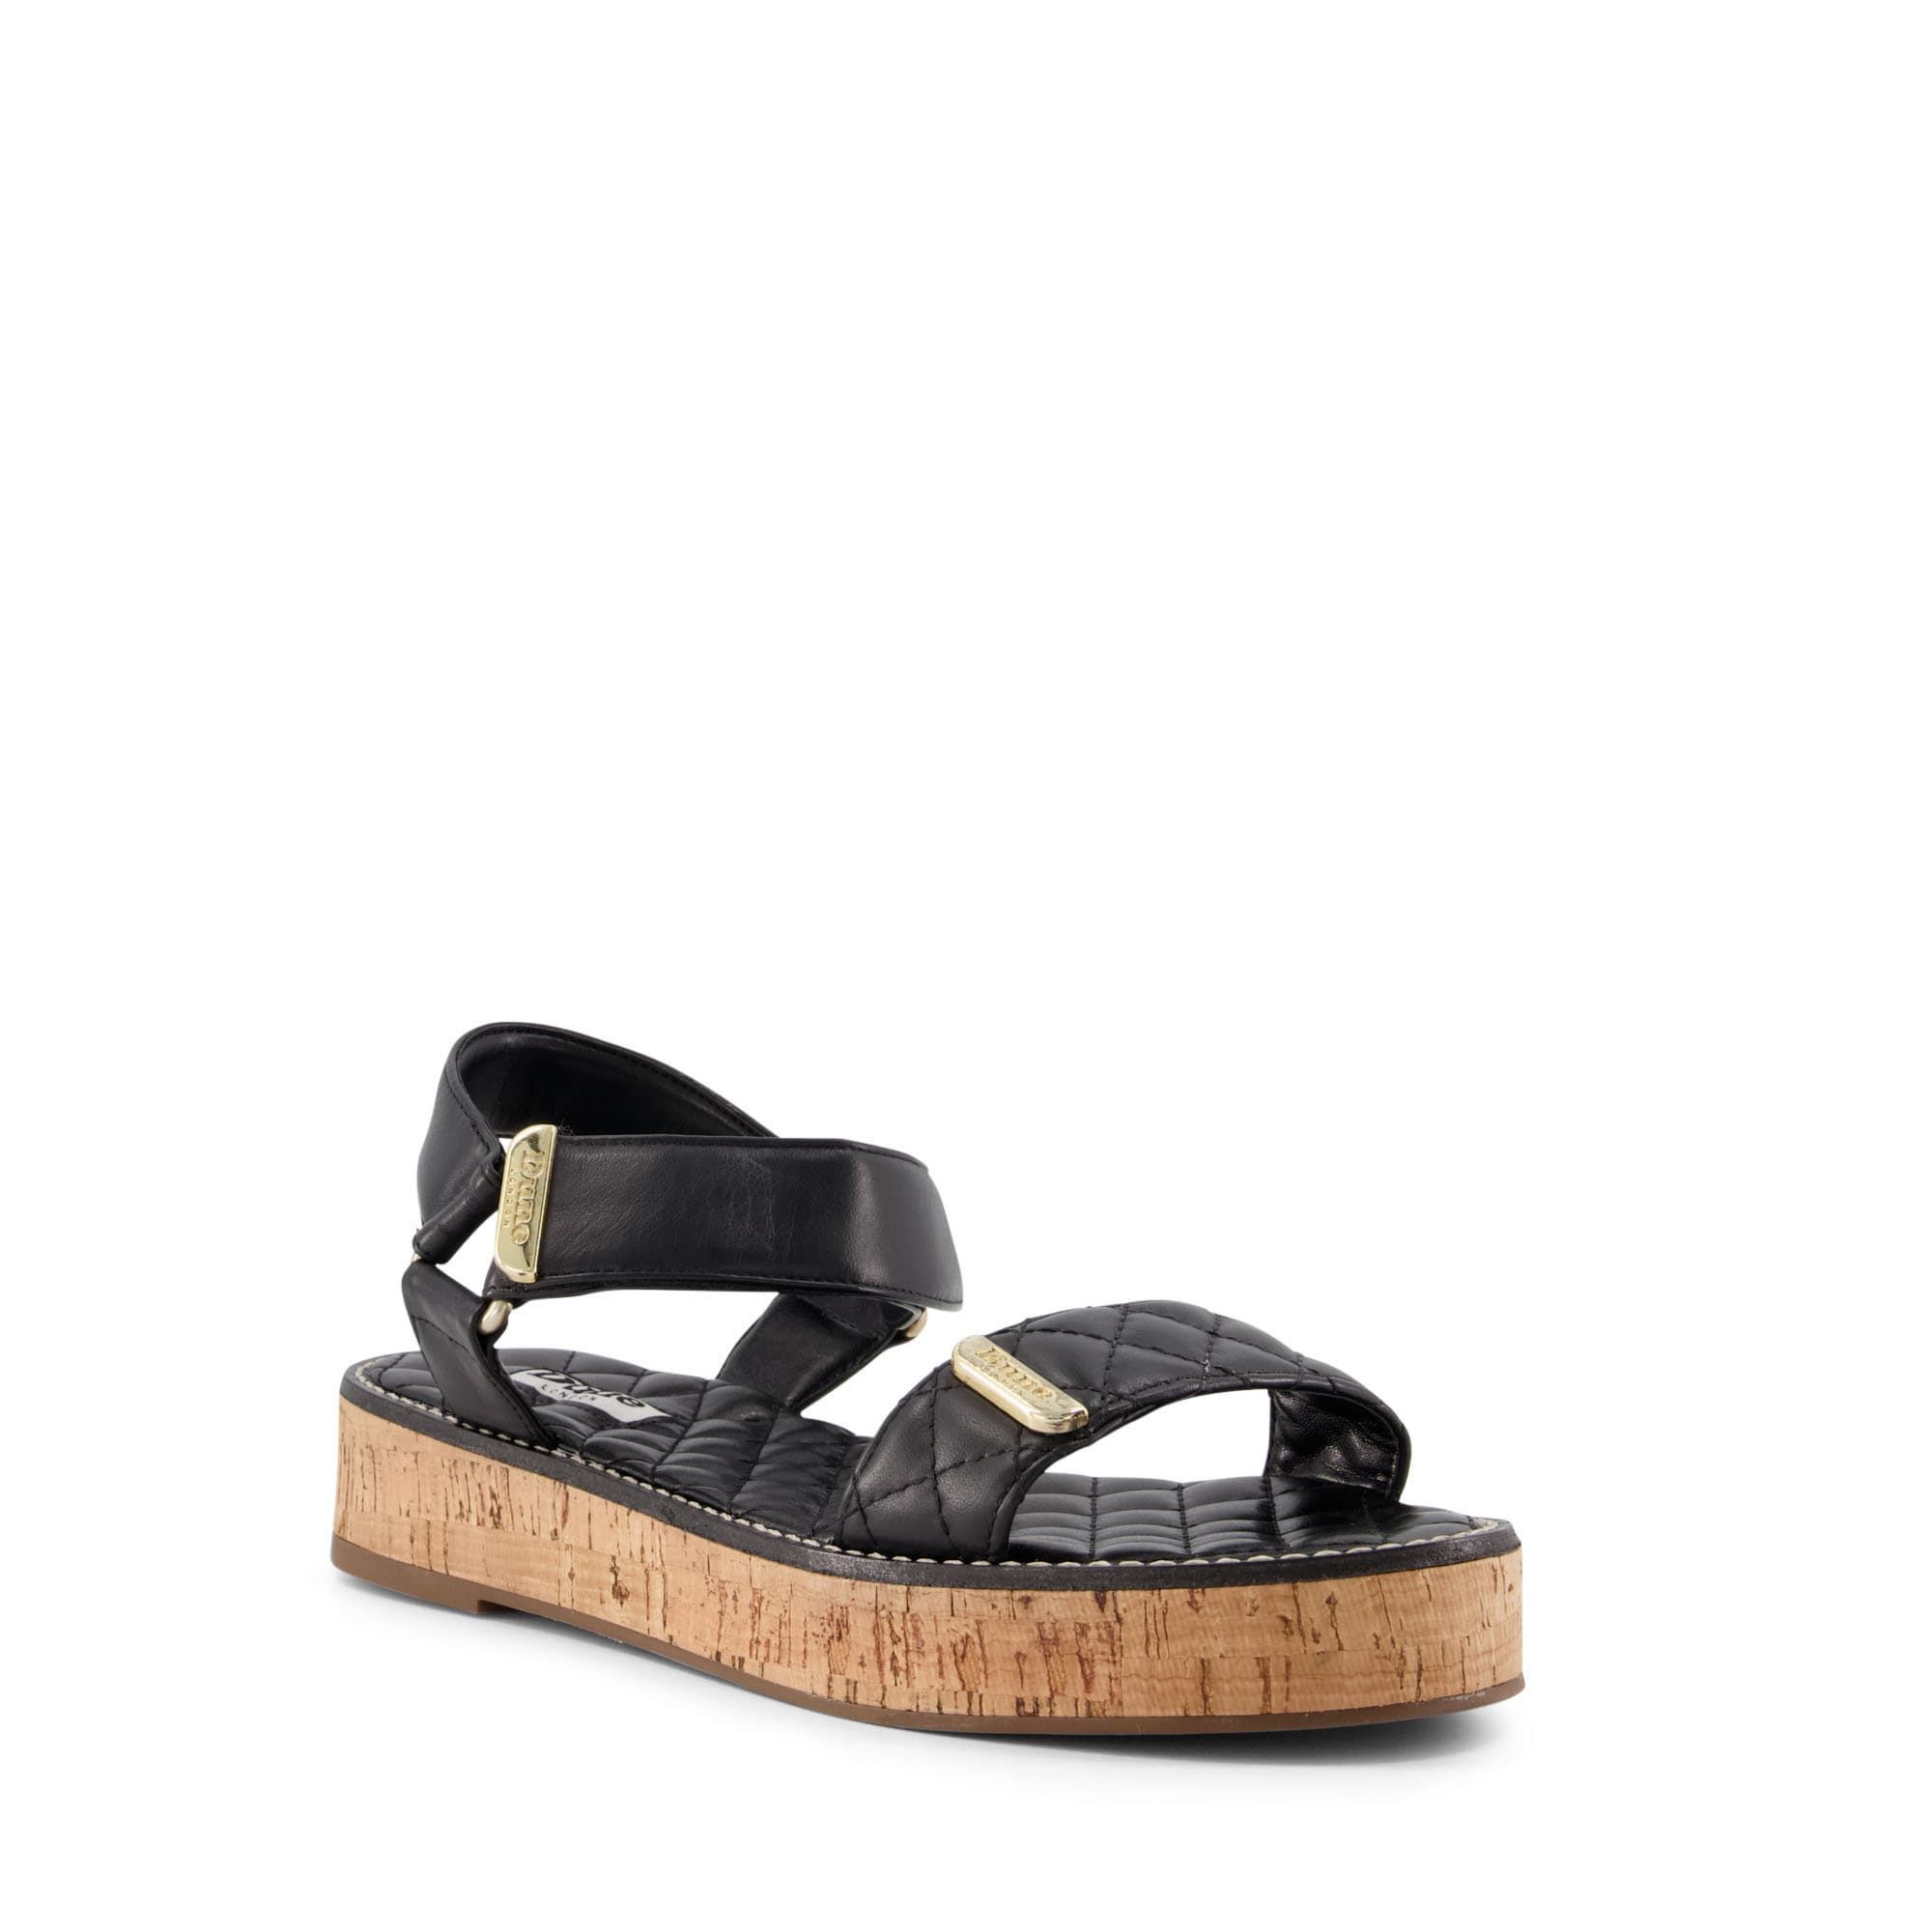 Trend-led quilting and golden hardware make these sandals a luxe daytime option. A cork flatform sole adds something summery, whilst the rip-tape straps can be adjusted to your most comfortable fit.